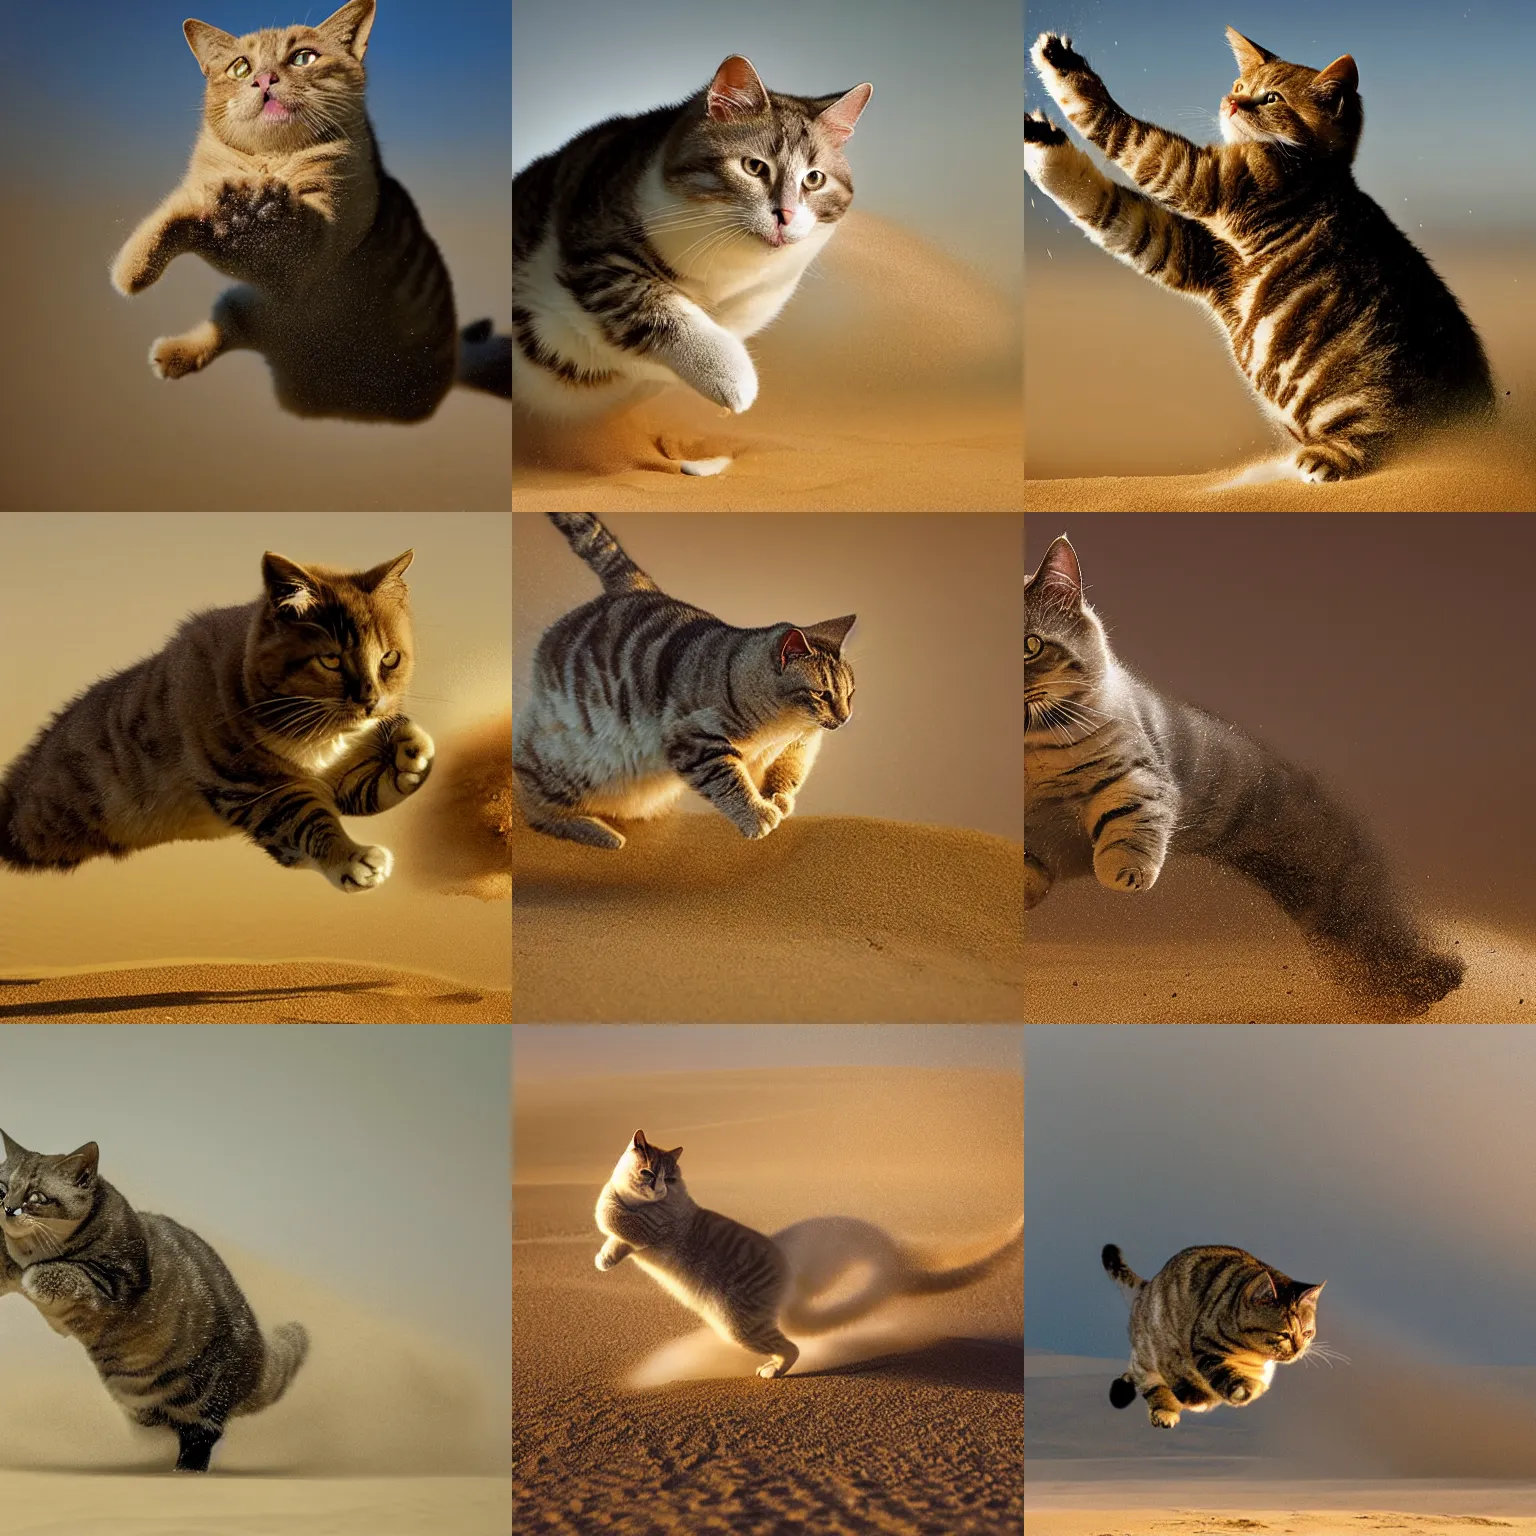 Prompt: award winning wildlife photography, a fat house cat, midair, launching towards the camera at high speed, jet propulsion cat, straight shot, high shutter speed, dust and sand in the air, wildlife photography by Paul Nicklen, shot by Joel Sartore, Skye Meaker, national geographic, perfect lighting, blurry background, bokeh